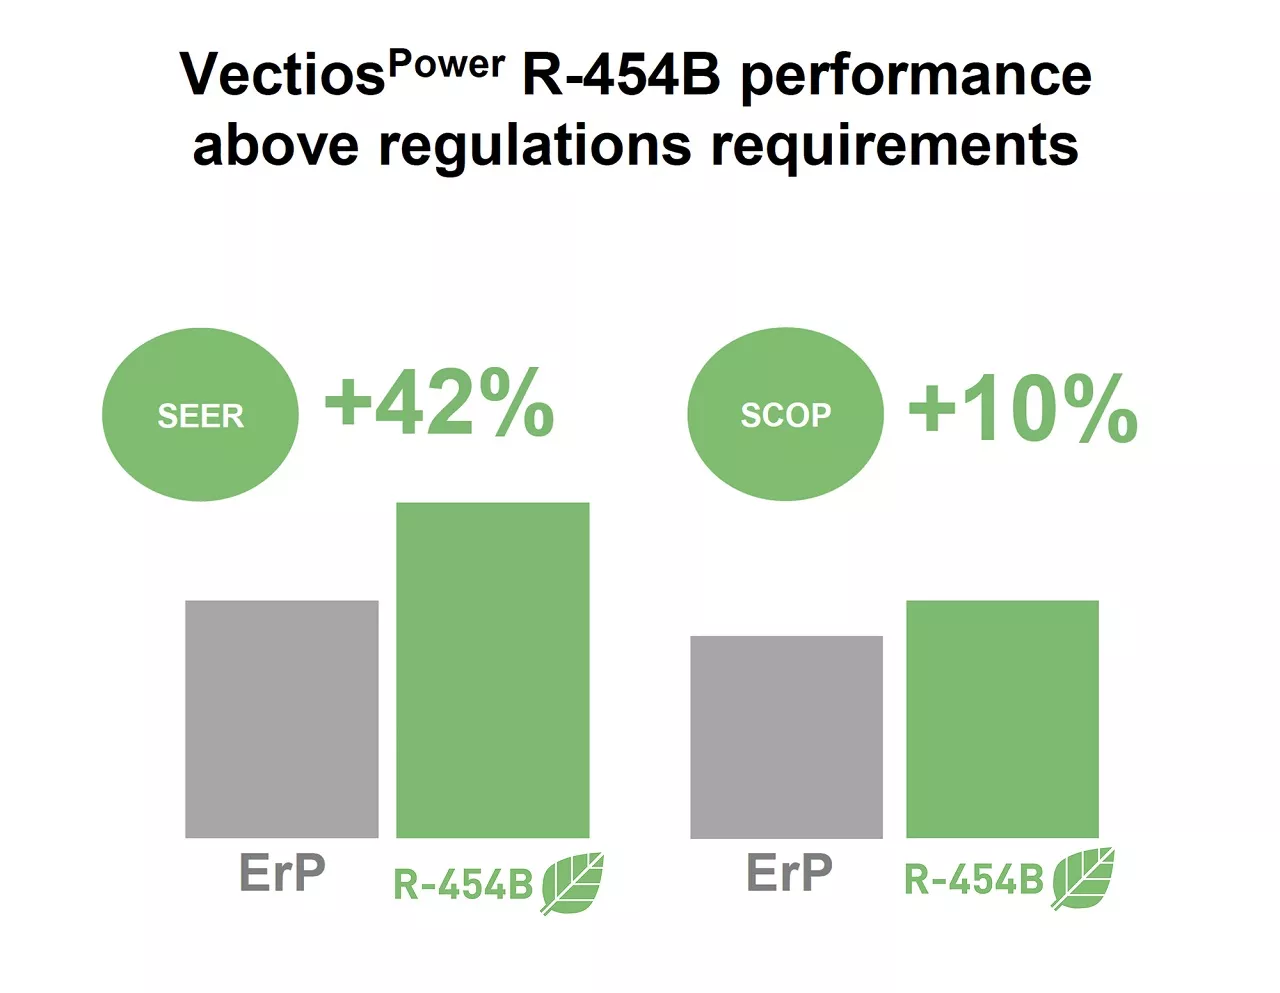 CIAT Launches New VectiosPower Packaged Rooftop Range on R-454B Refrigerant